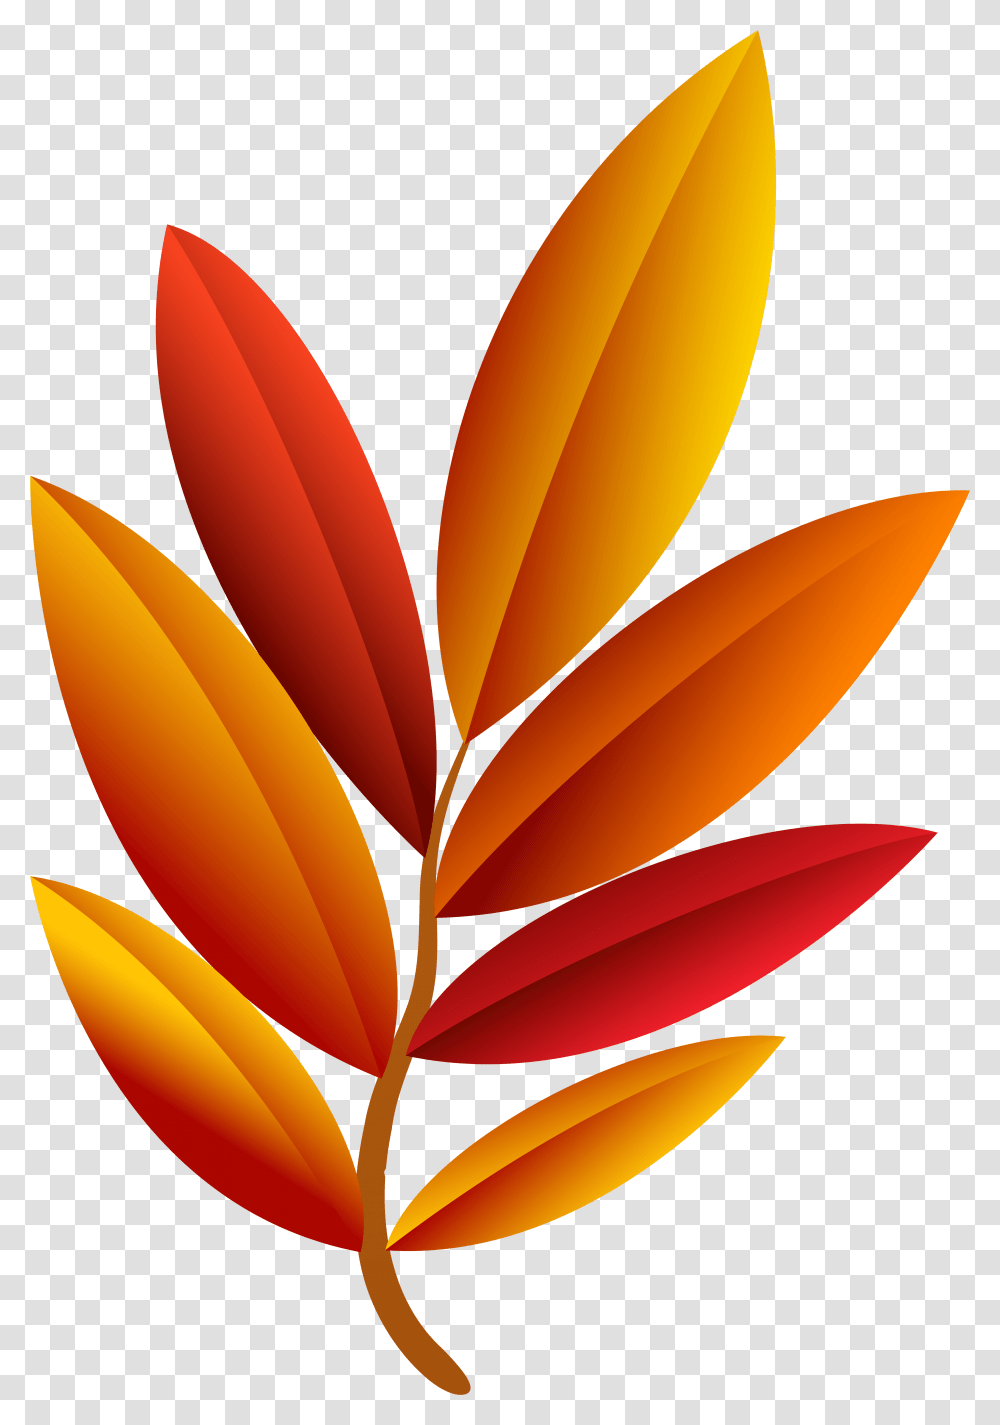 Download Falling Autumn Leaves Portable Network Portable Network Graphics, Plant, Banana, Fruit, Food Transparent Png